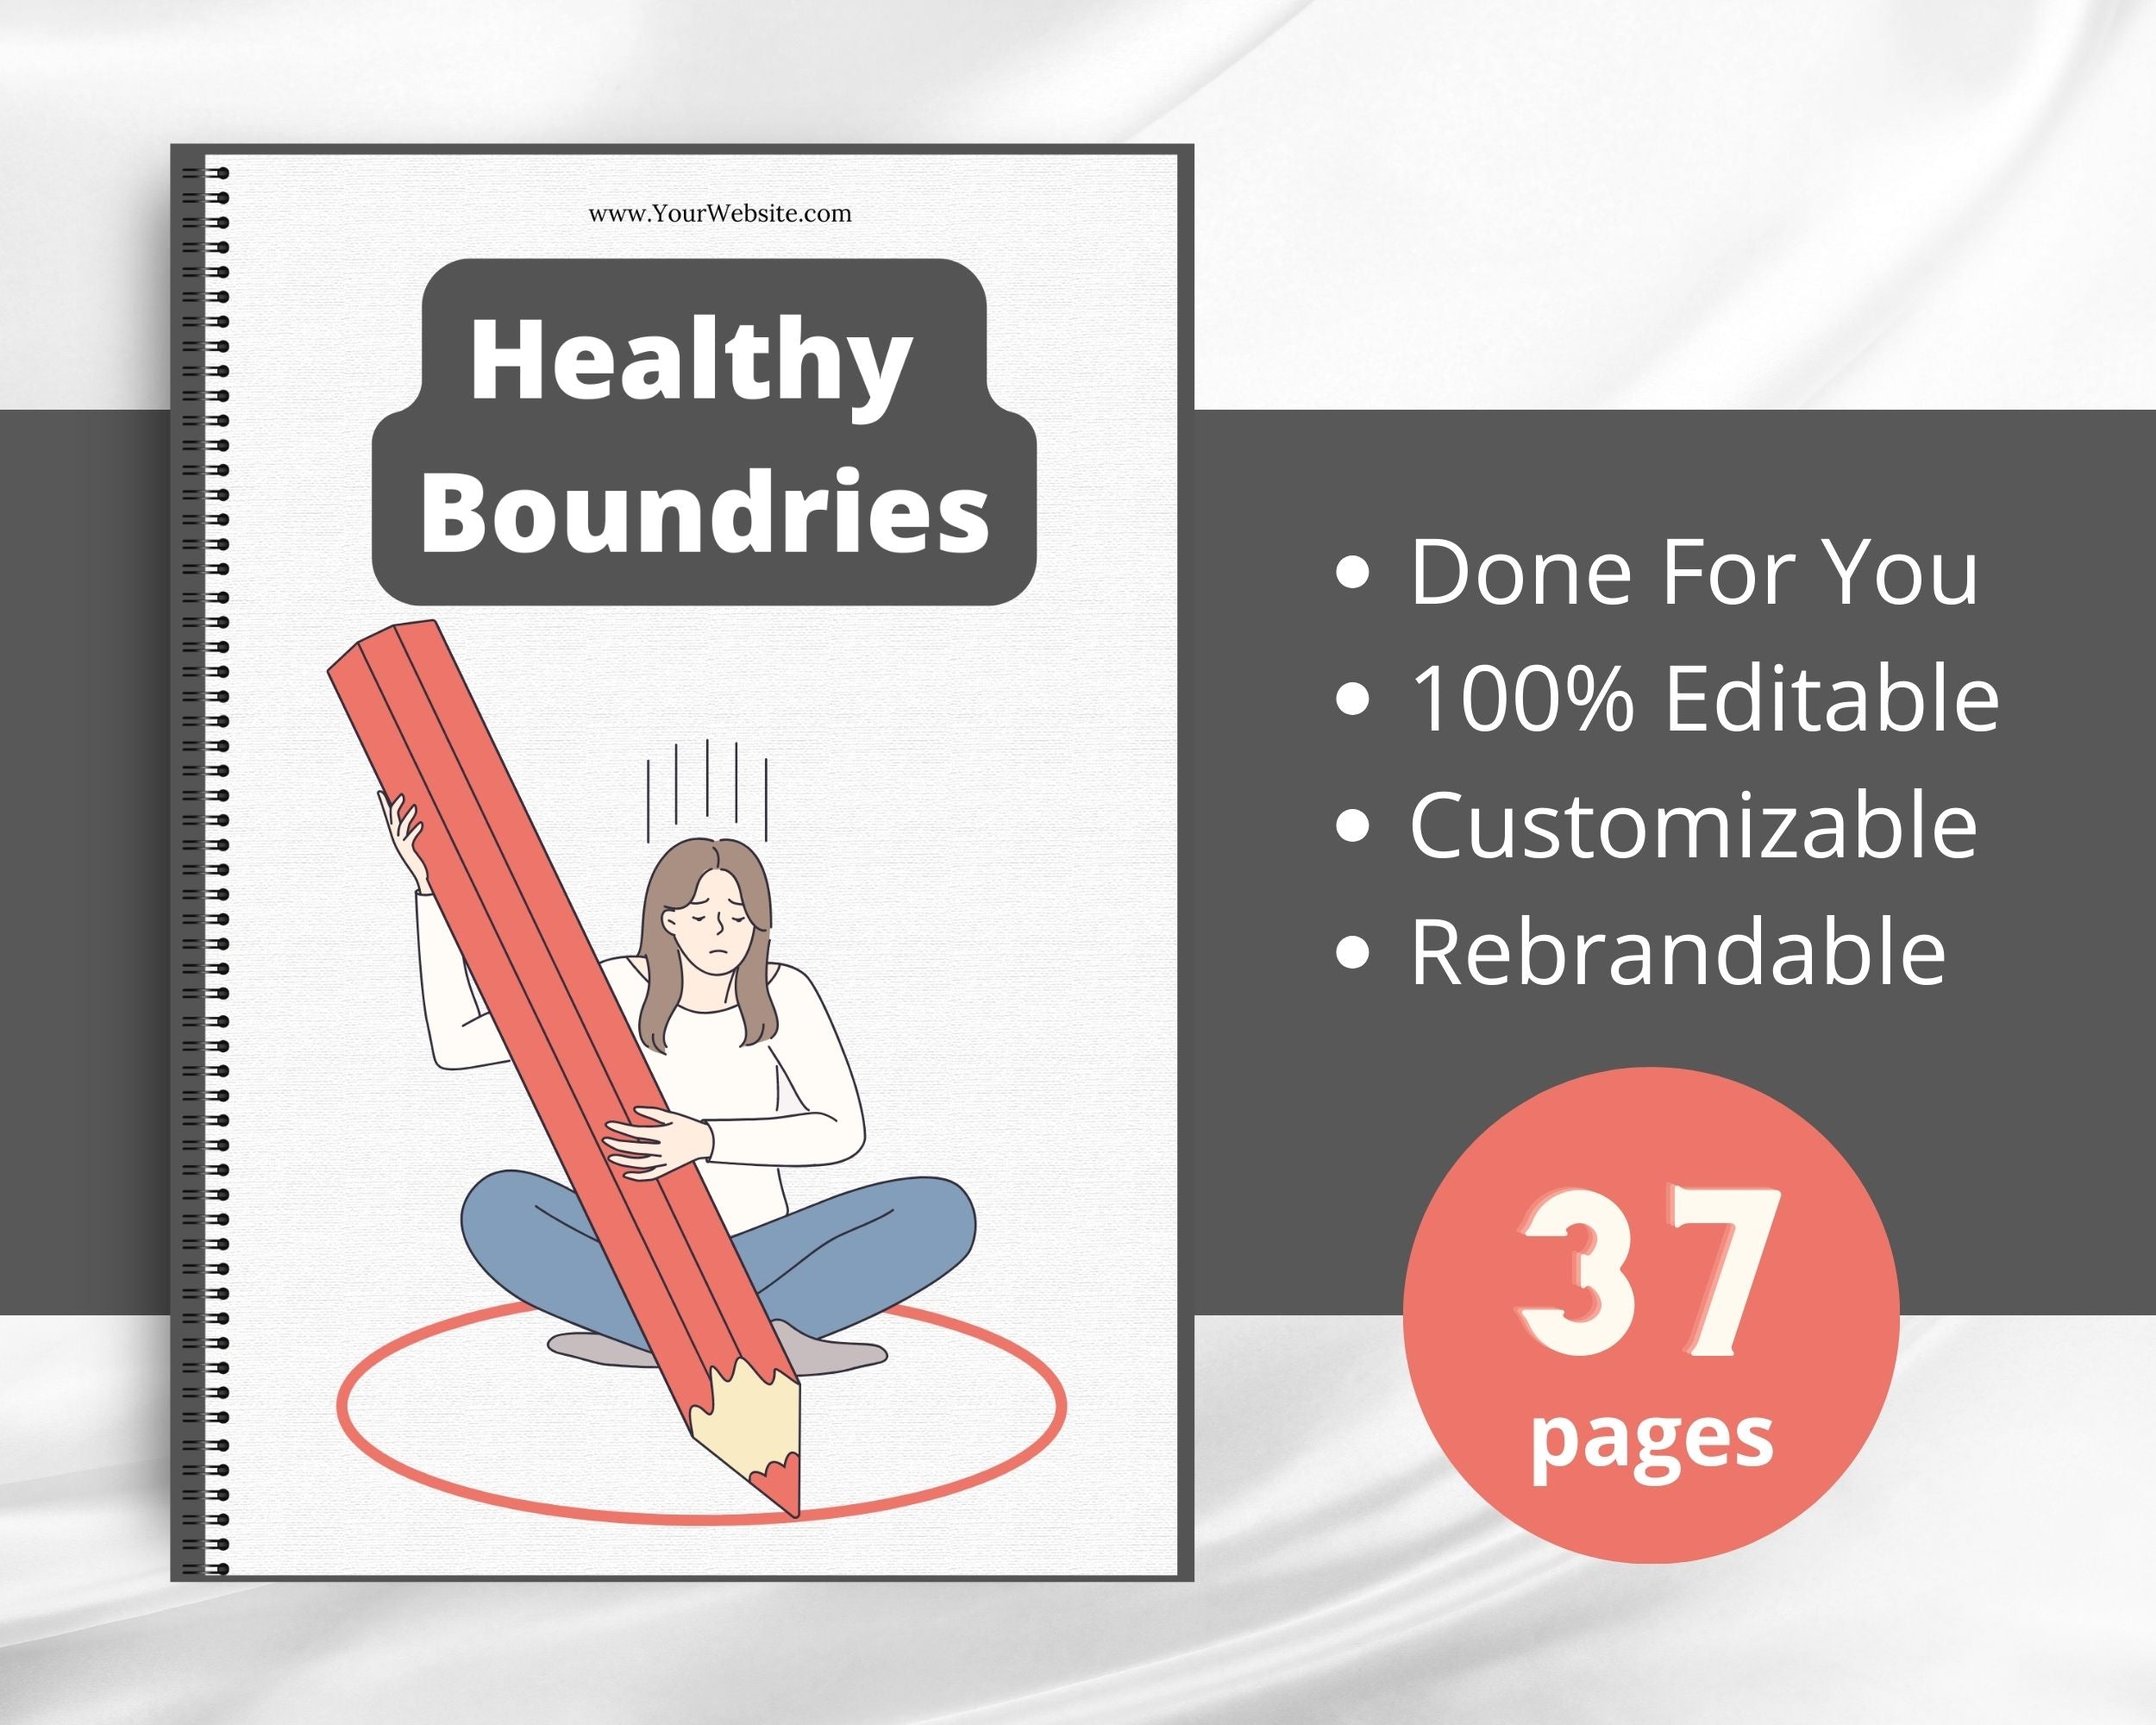 Editable Healthy Boundaries Ebook | Done-for-You Ebook in Canva | Rebrandable and Resizable Canva Template